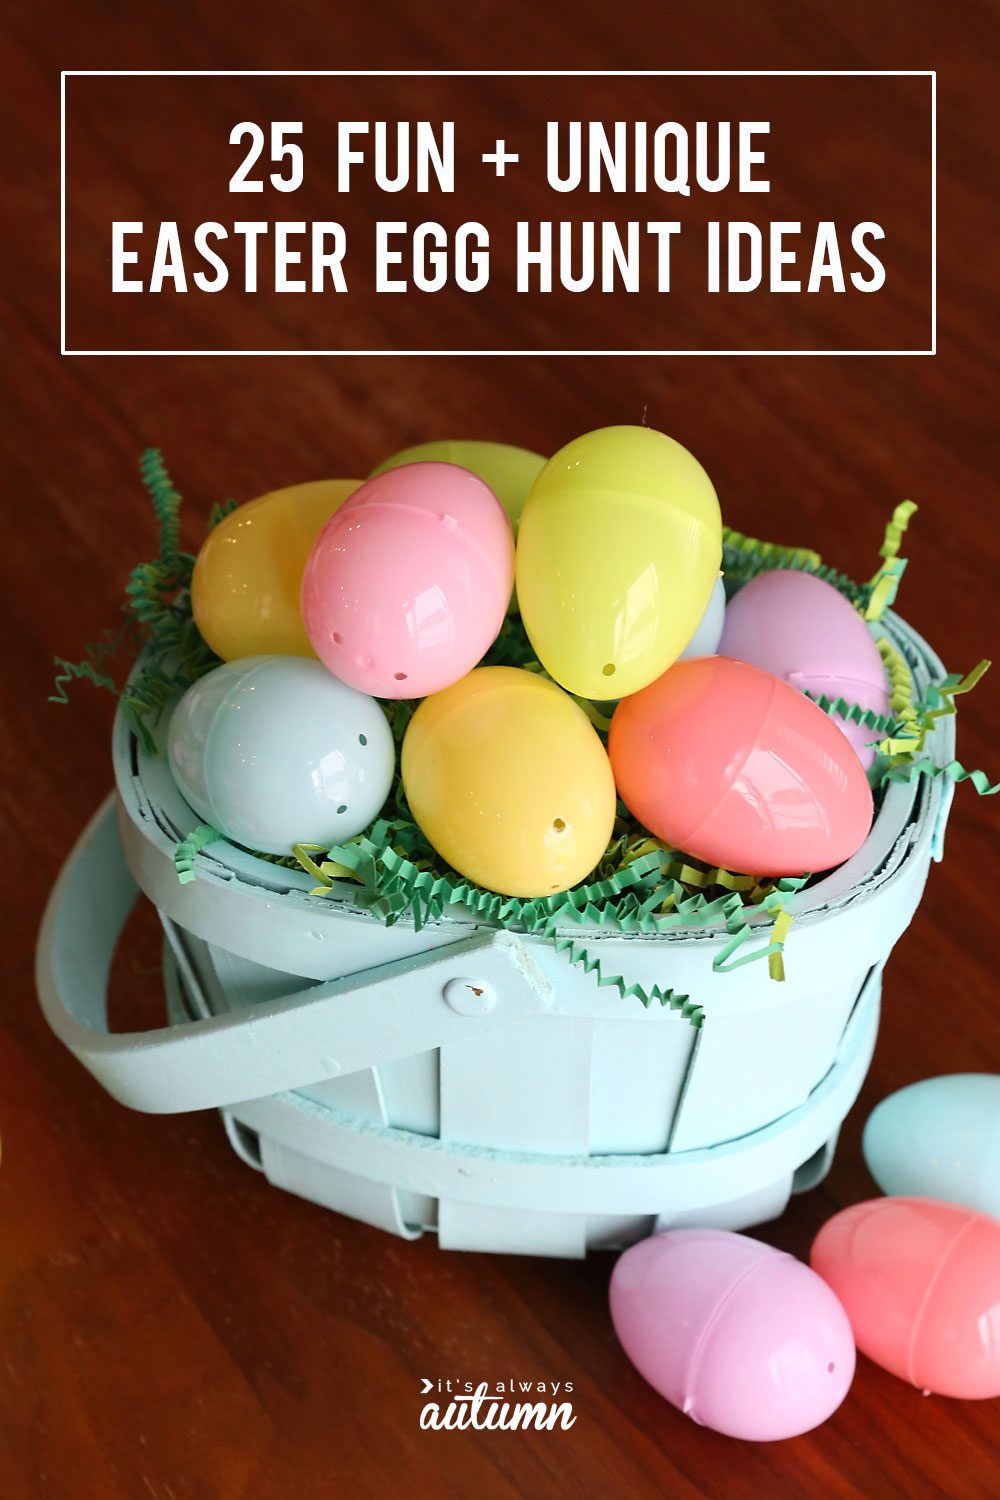 25 genius Easter egg hunt ideas and hacks: how to make it fair for little kids and fun for teens!